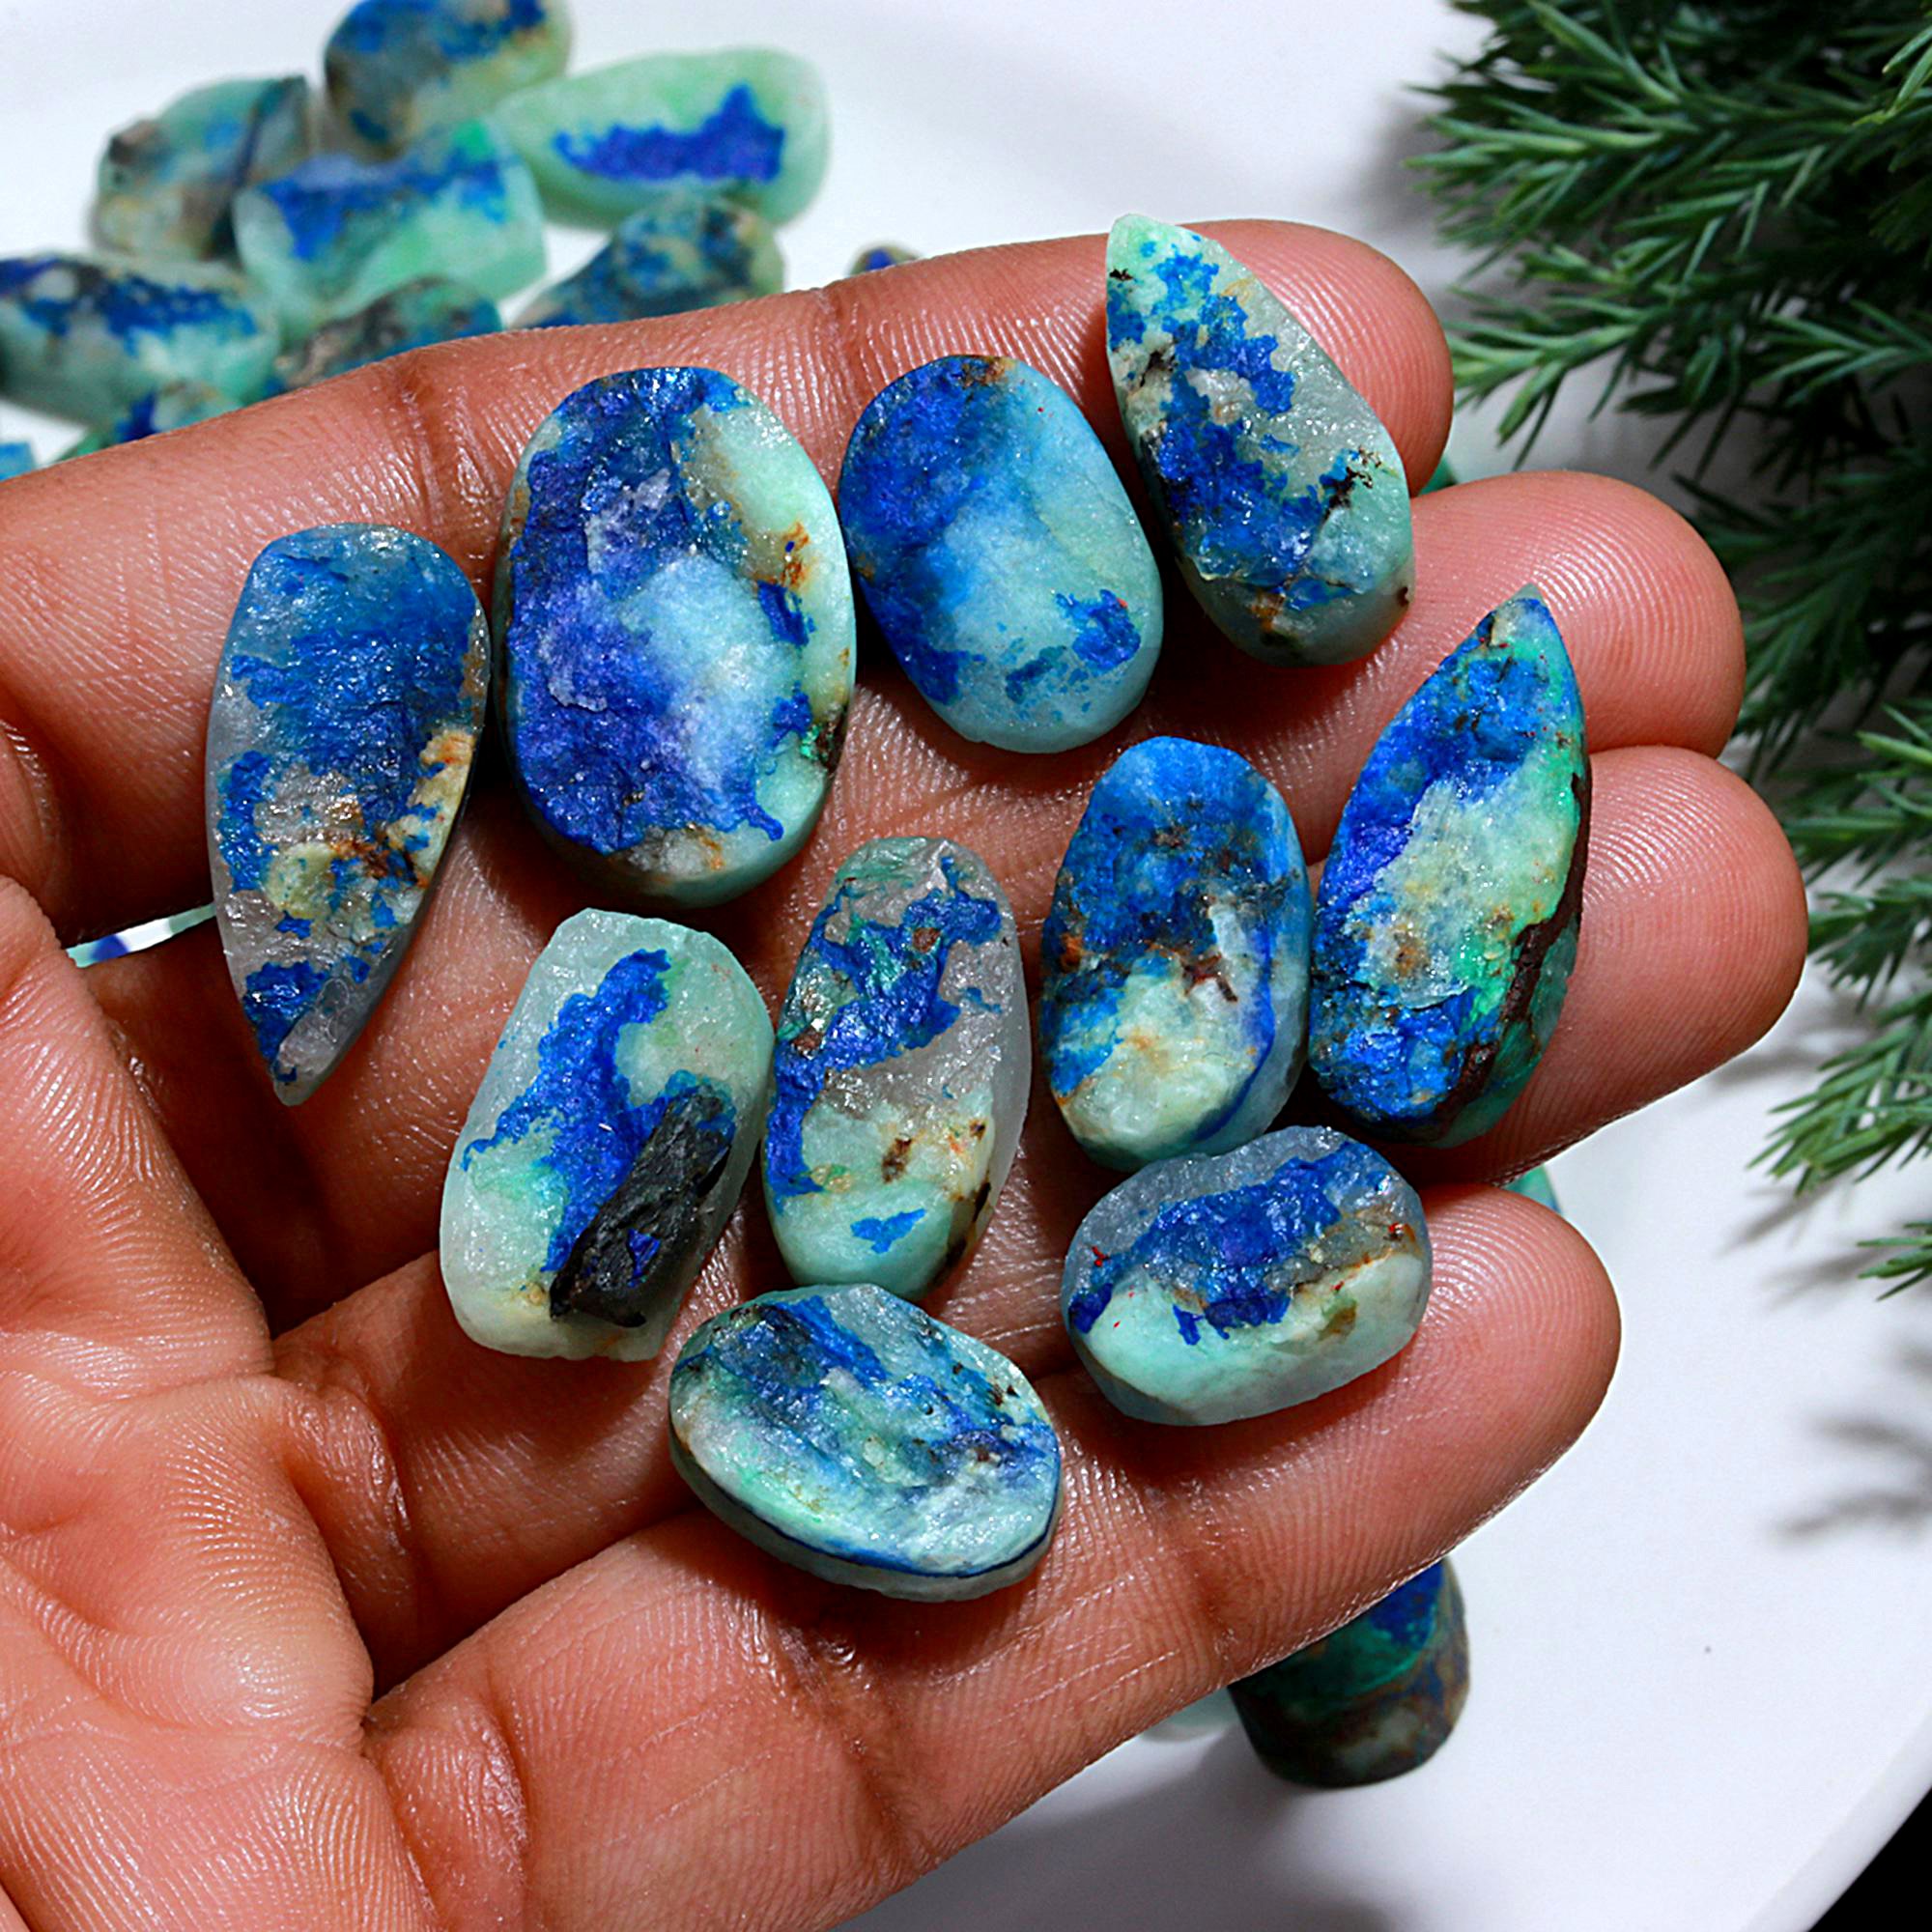 94 Pcs 552.Cts Natural Azurite Druzy Unpolished Loose Cabochon Gemstone For Jewelry Wholesale Lot Size 23x11 9x10mm